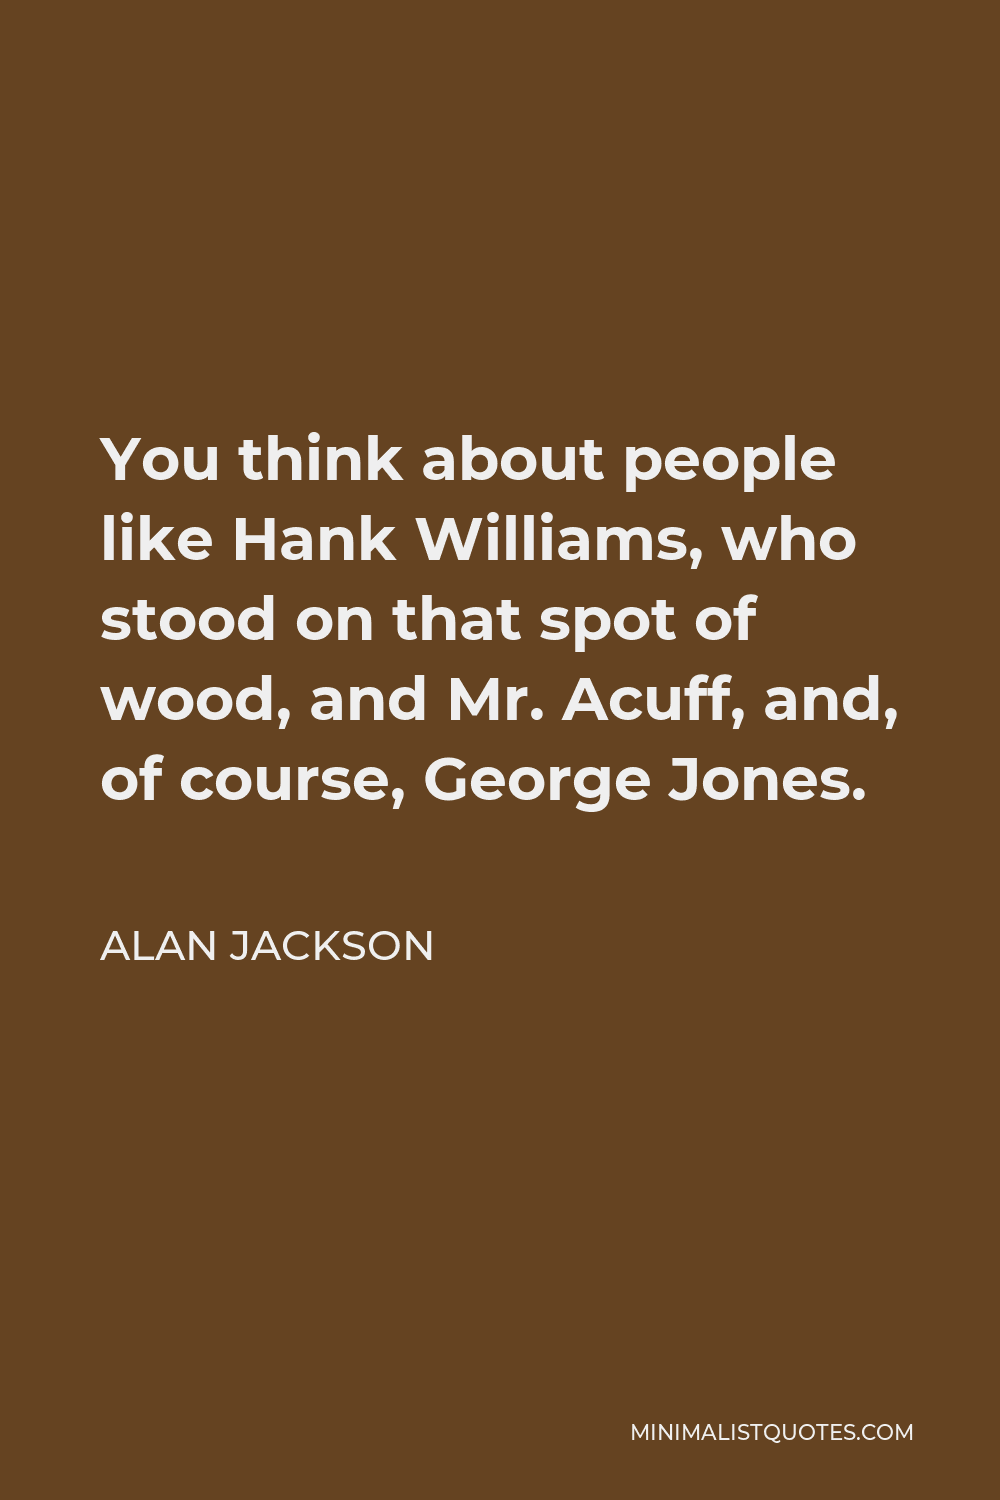 Alan Jackson Quote - You think about people like Hank Williams, who stood on that spot of wood, and Mr. Acuff, and, of course, George Jones.